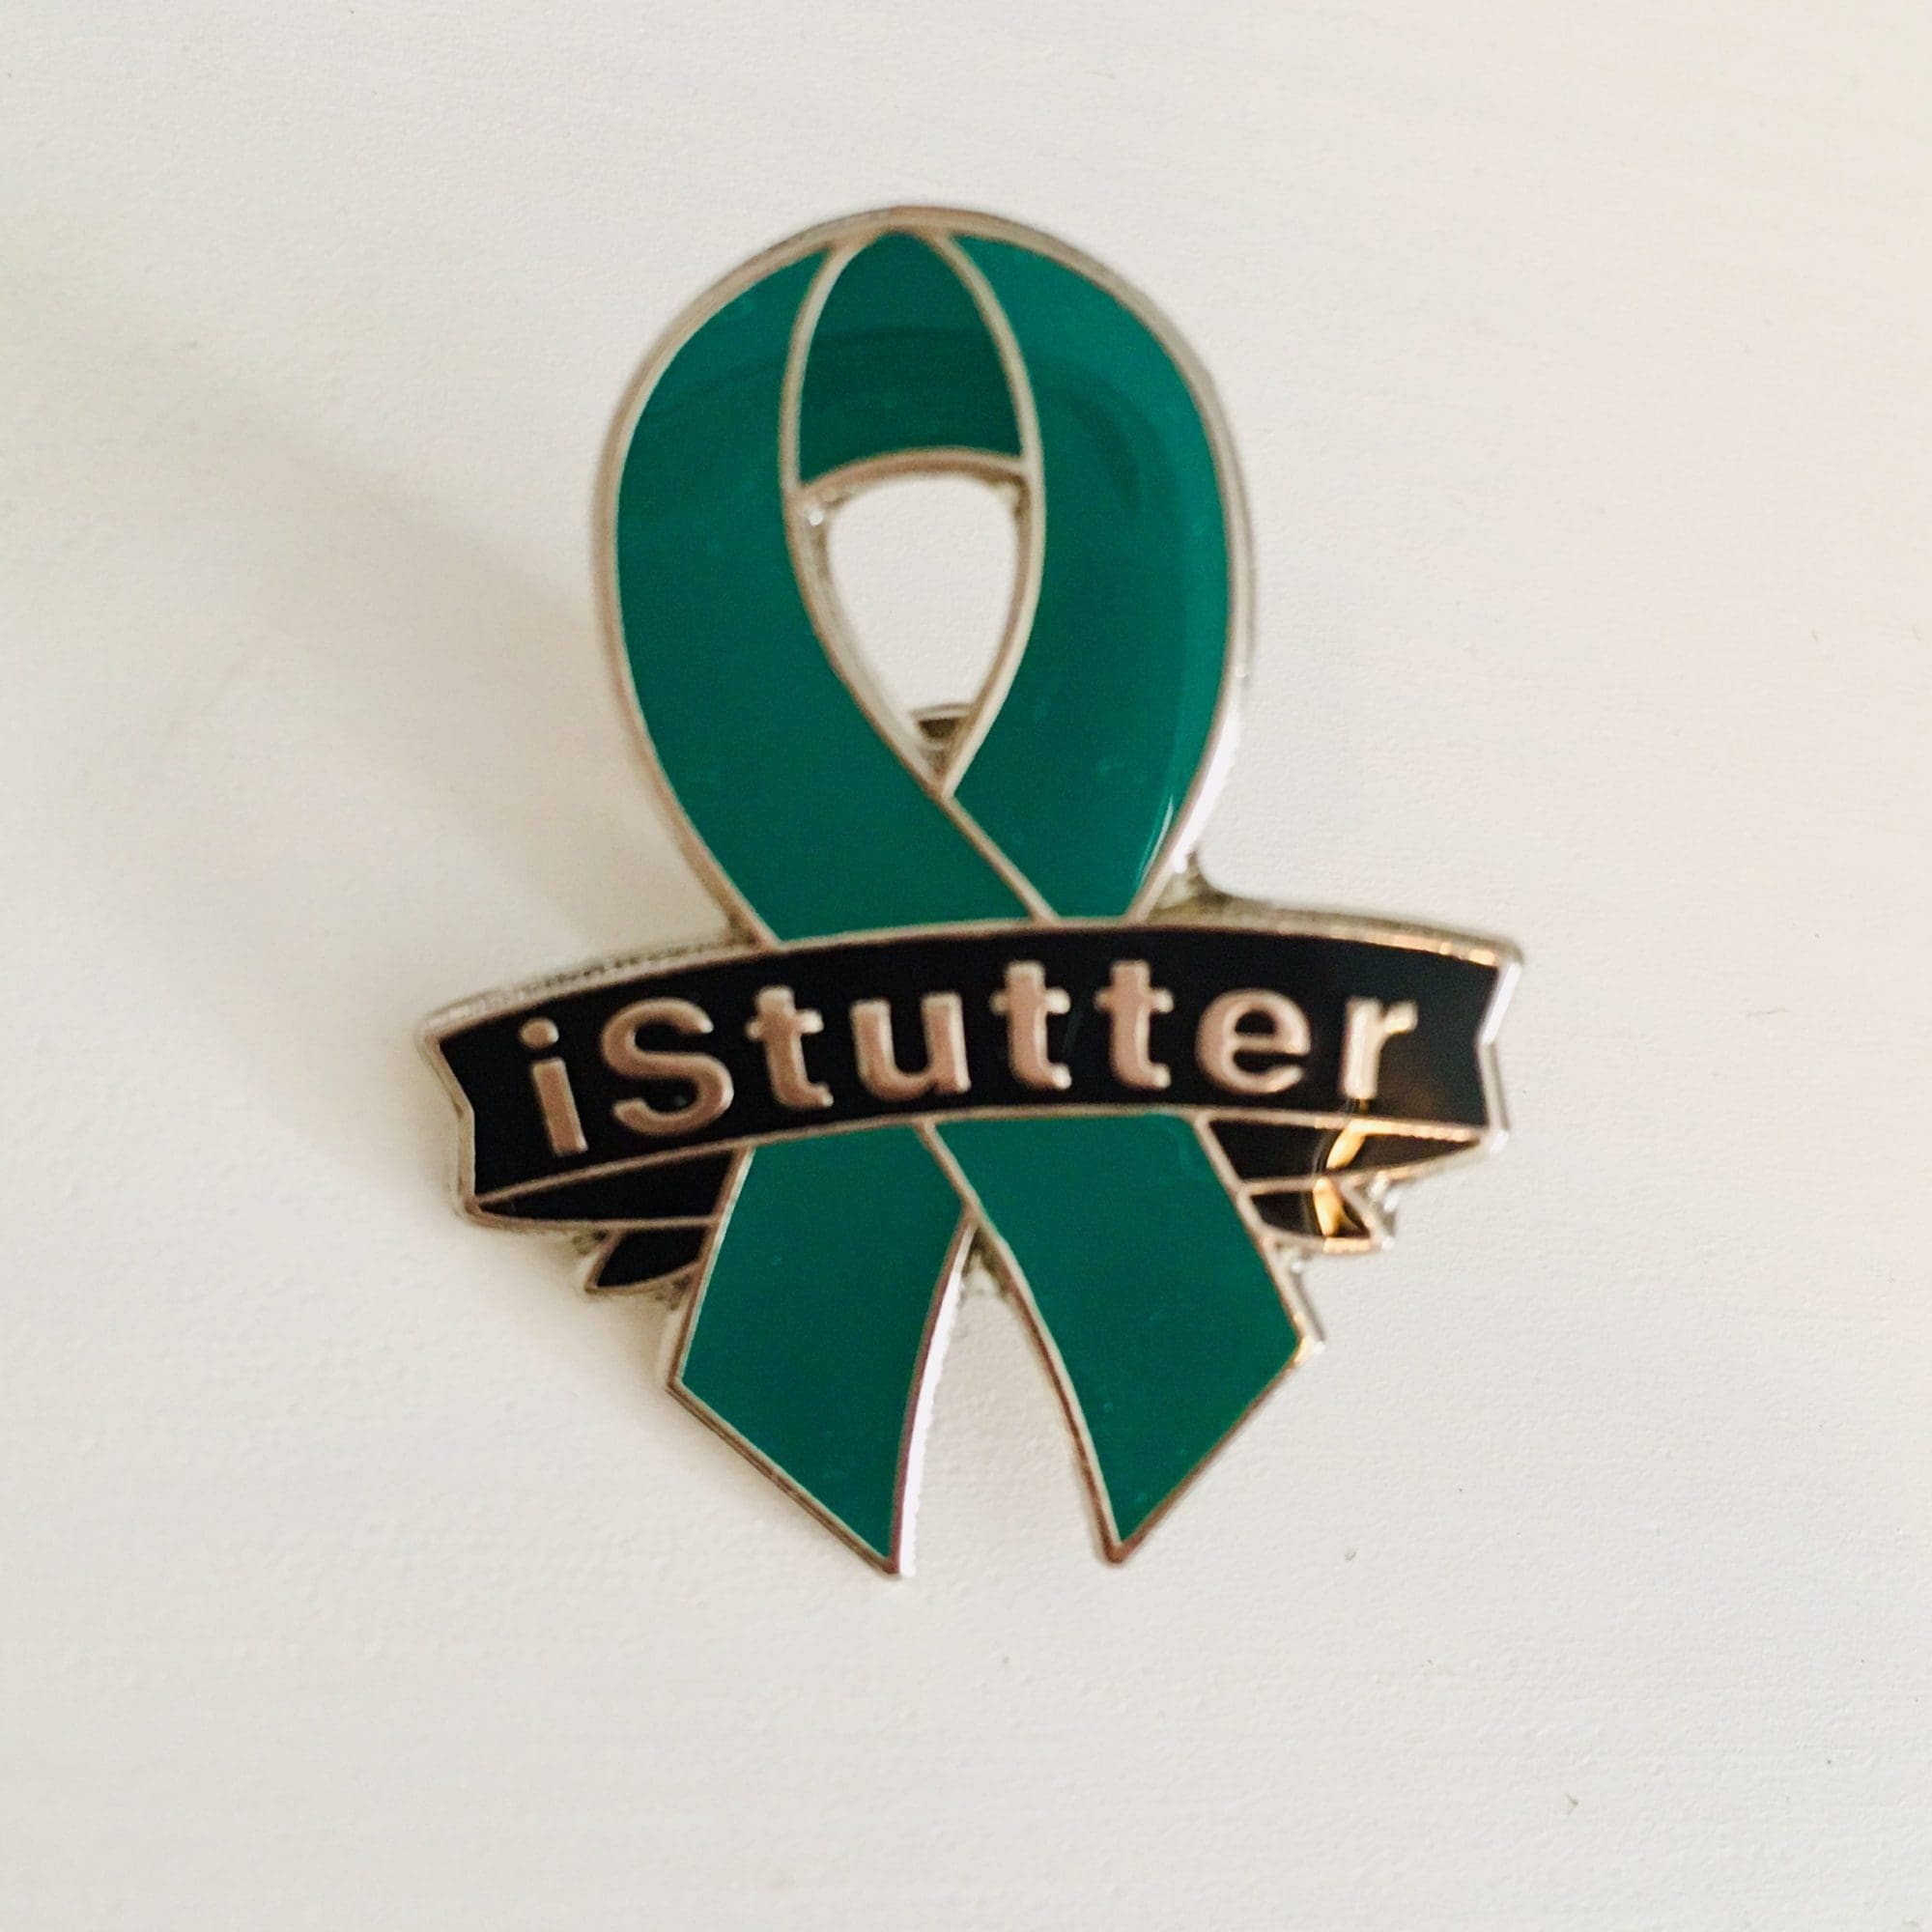 A green awareness ribbon pin with a banner across the center bearing the inscription "If You Stutter, You Are Not Alone" on a white background.